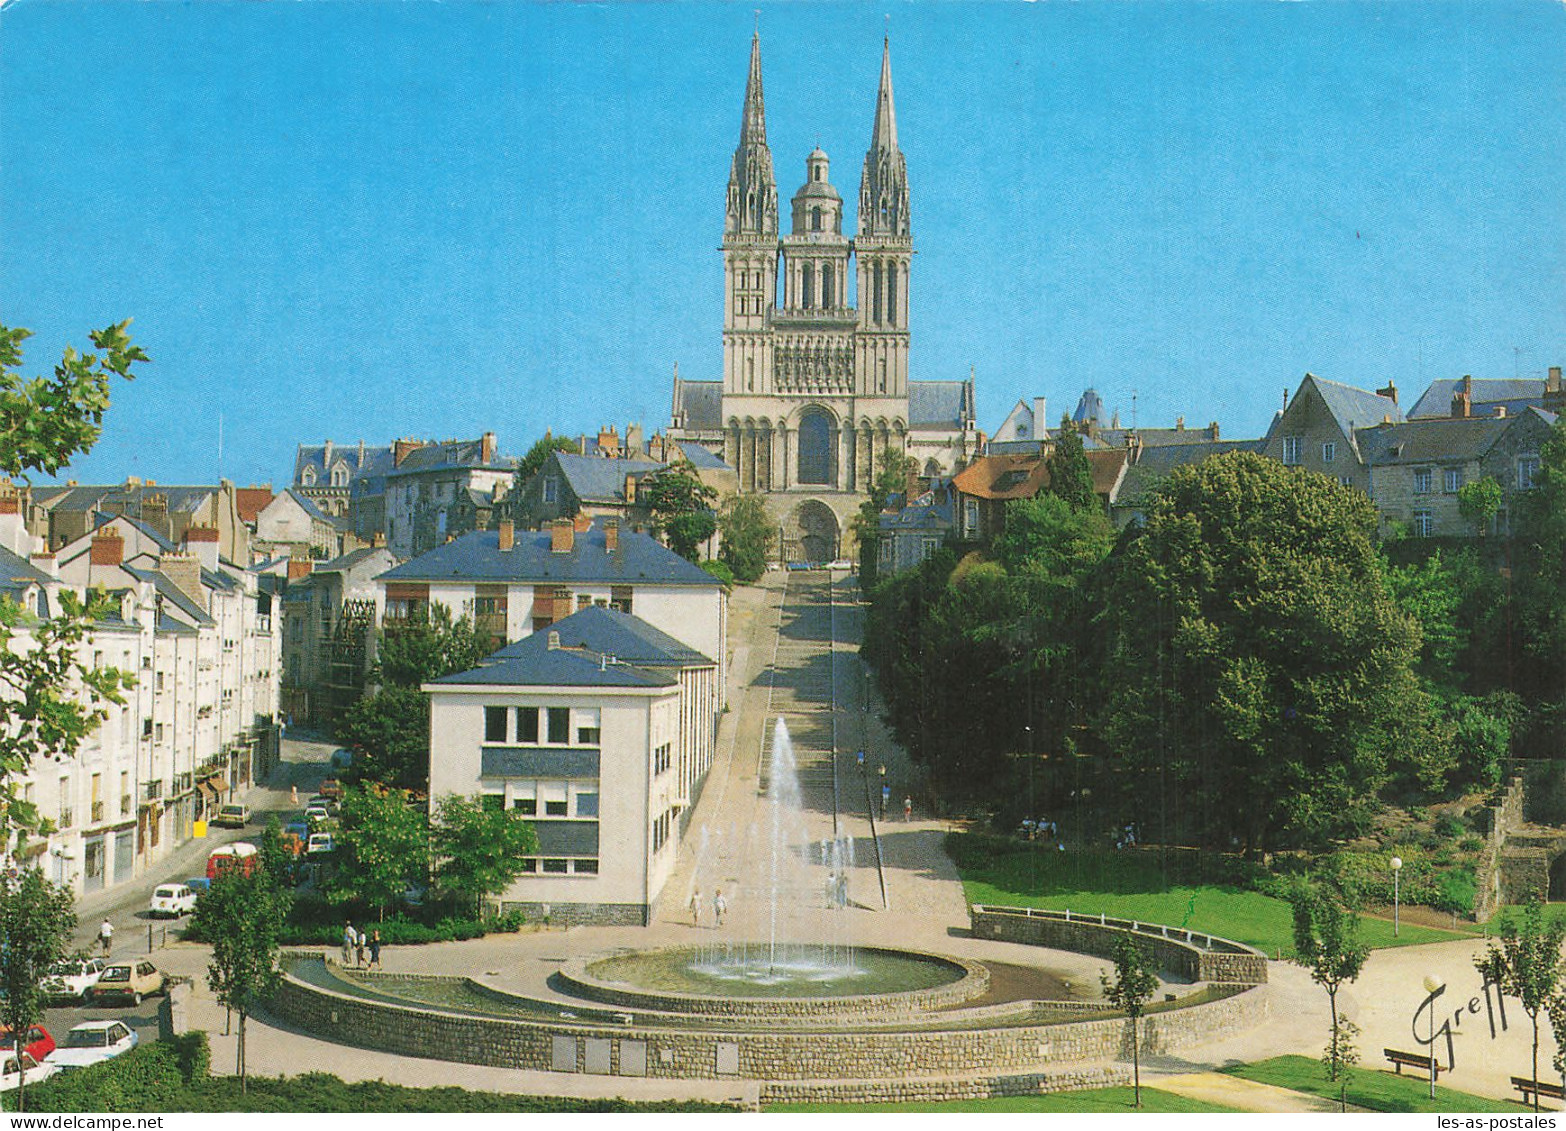 49 ANGERS LA CATHEDRALE SAINT MAURICE - Angers